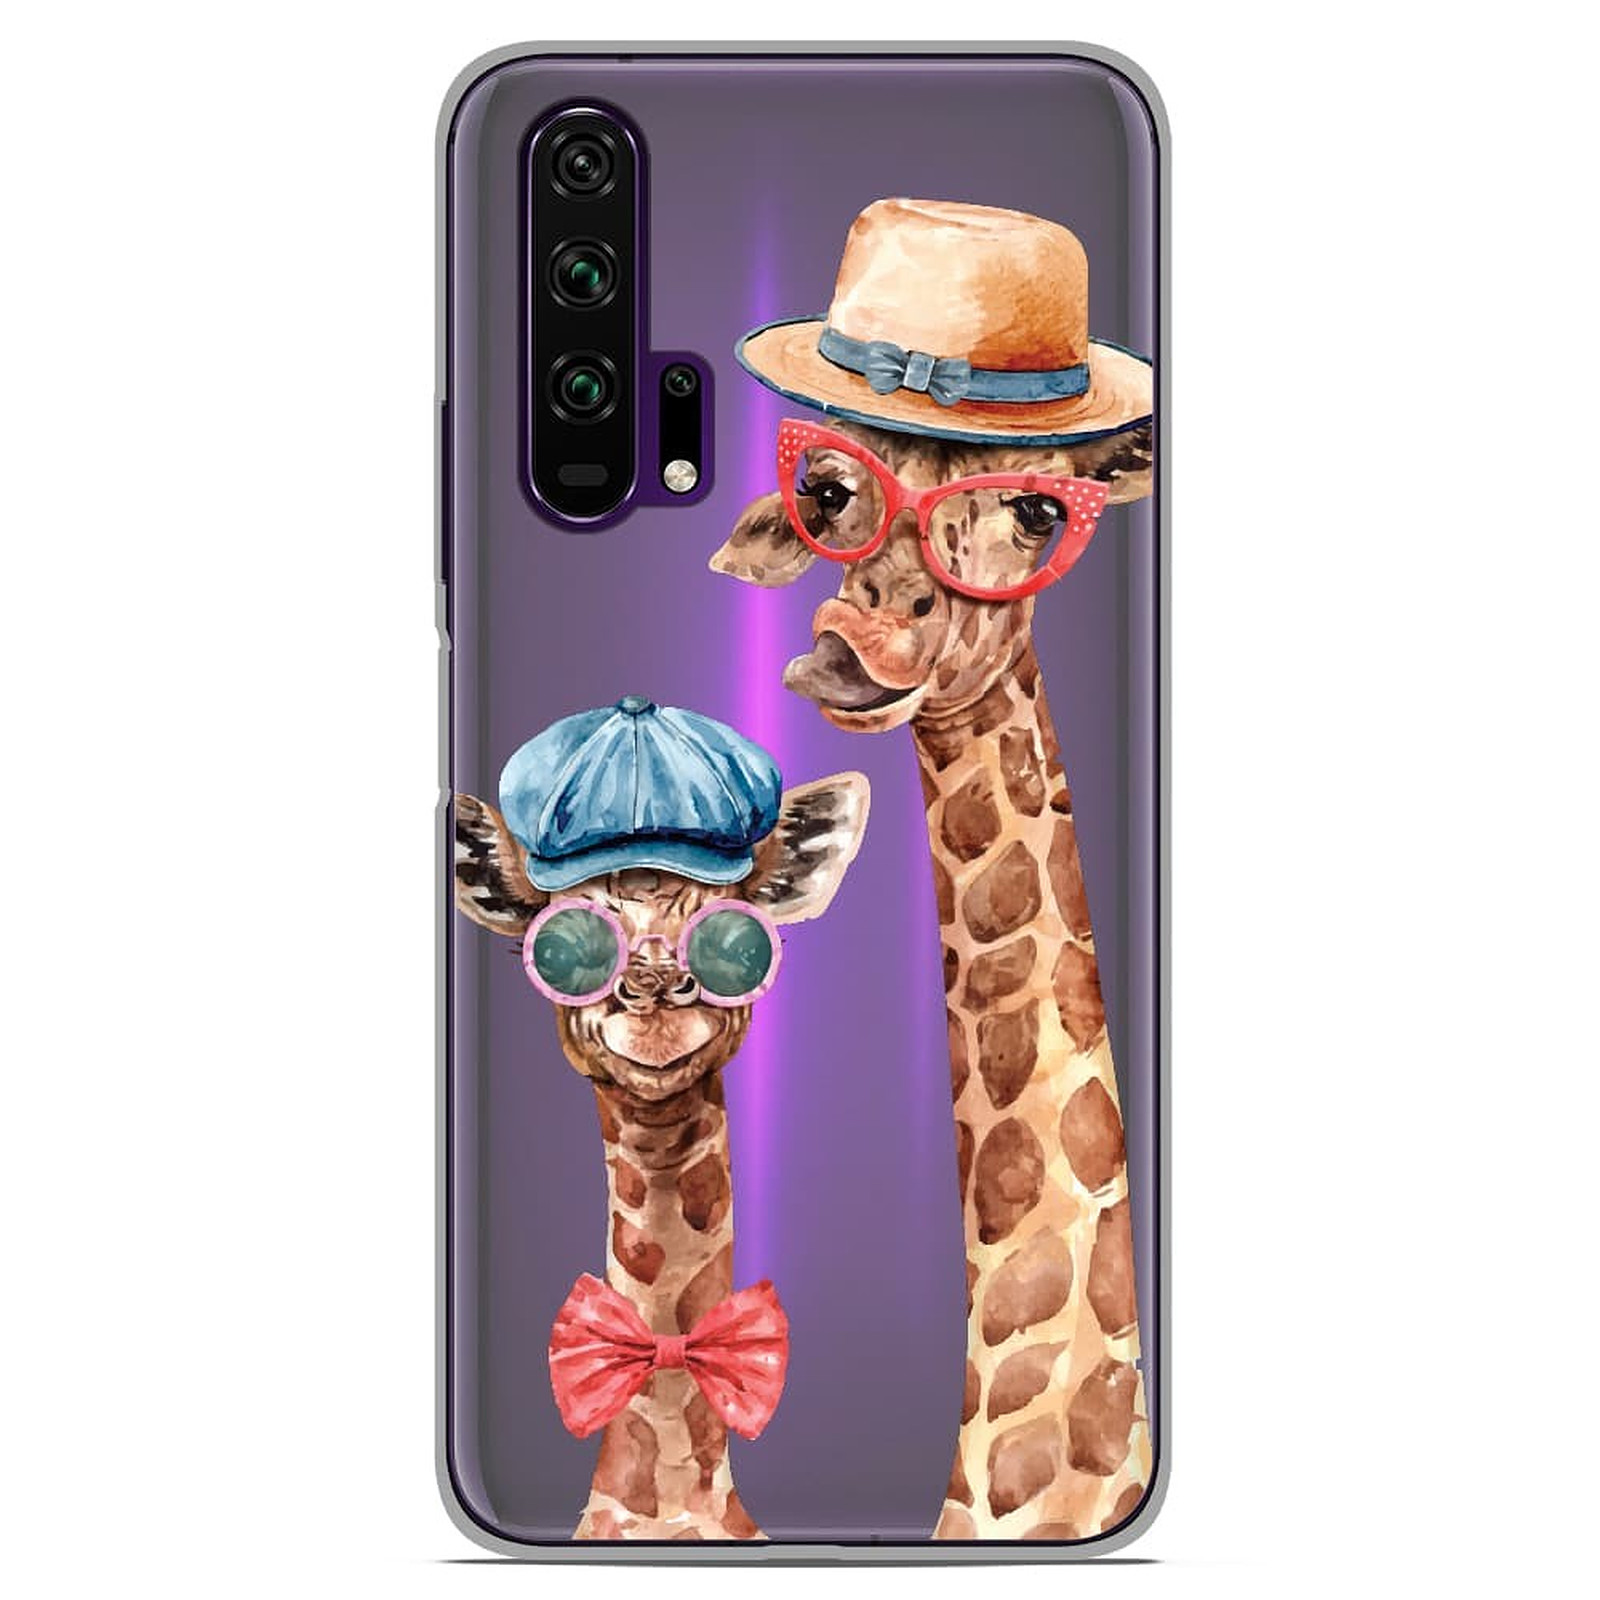 1001 Coques Coque silicone gel Huawei Honor 20 Pro motif Funny Girafe - Coque telephone 1001Coques